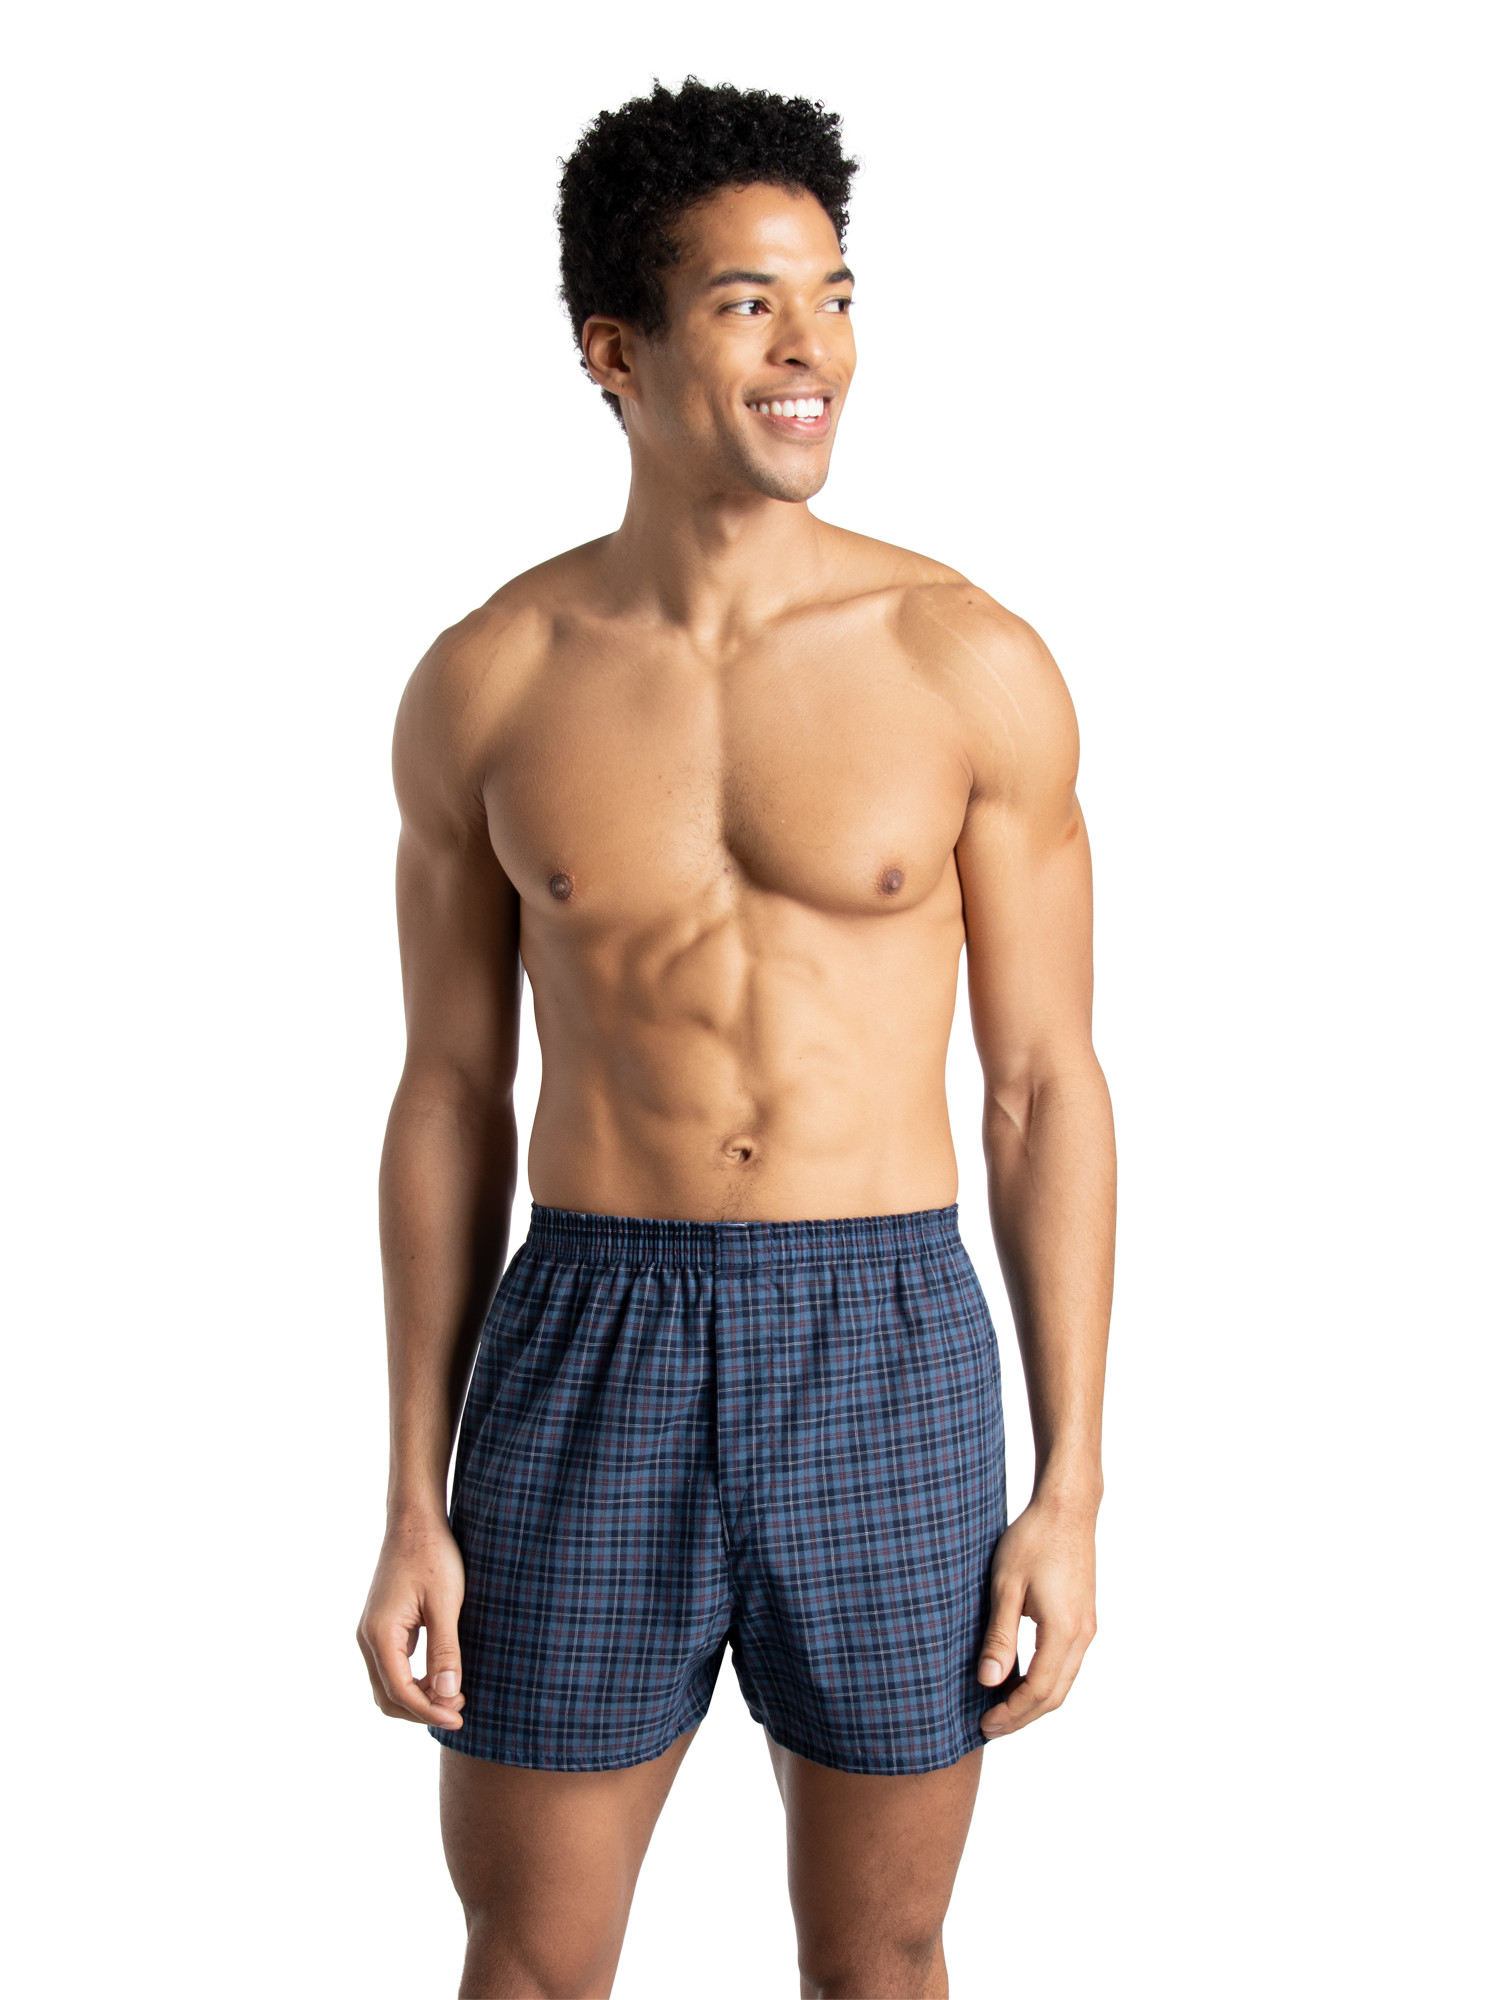 Fruit of the Loom Men's Woven Boxers, 6 Pack - image 4 of 12